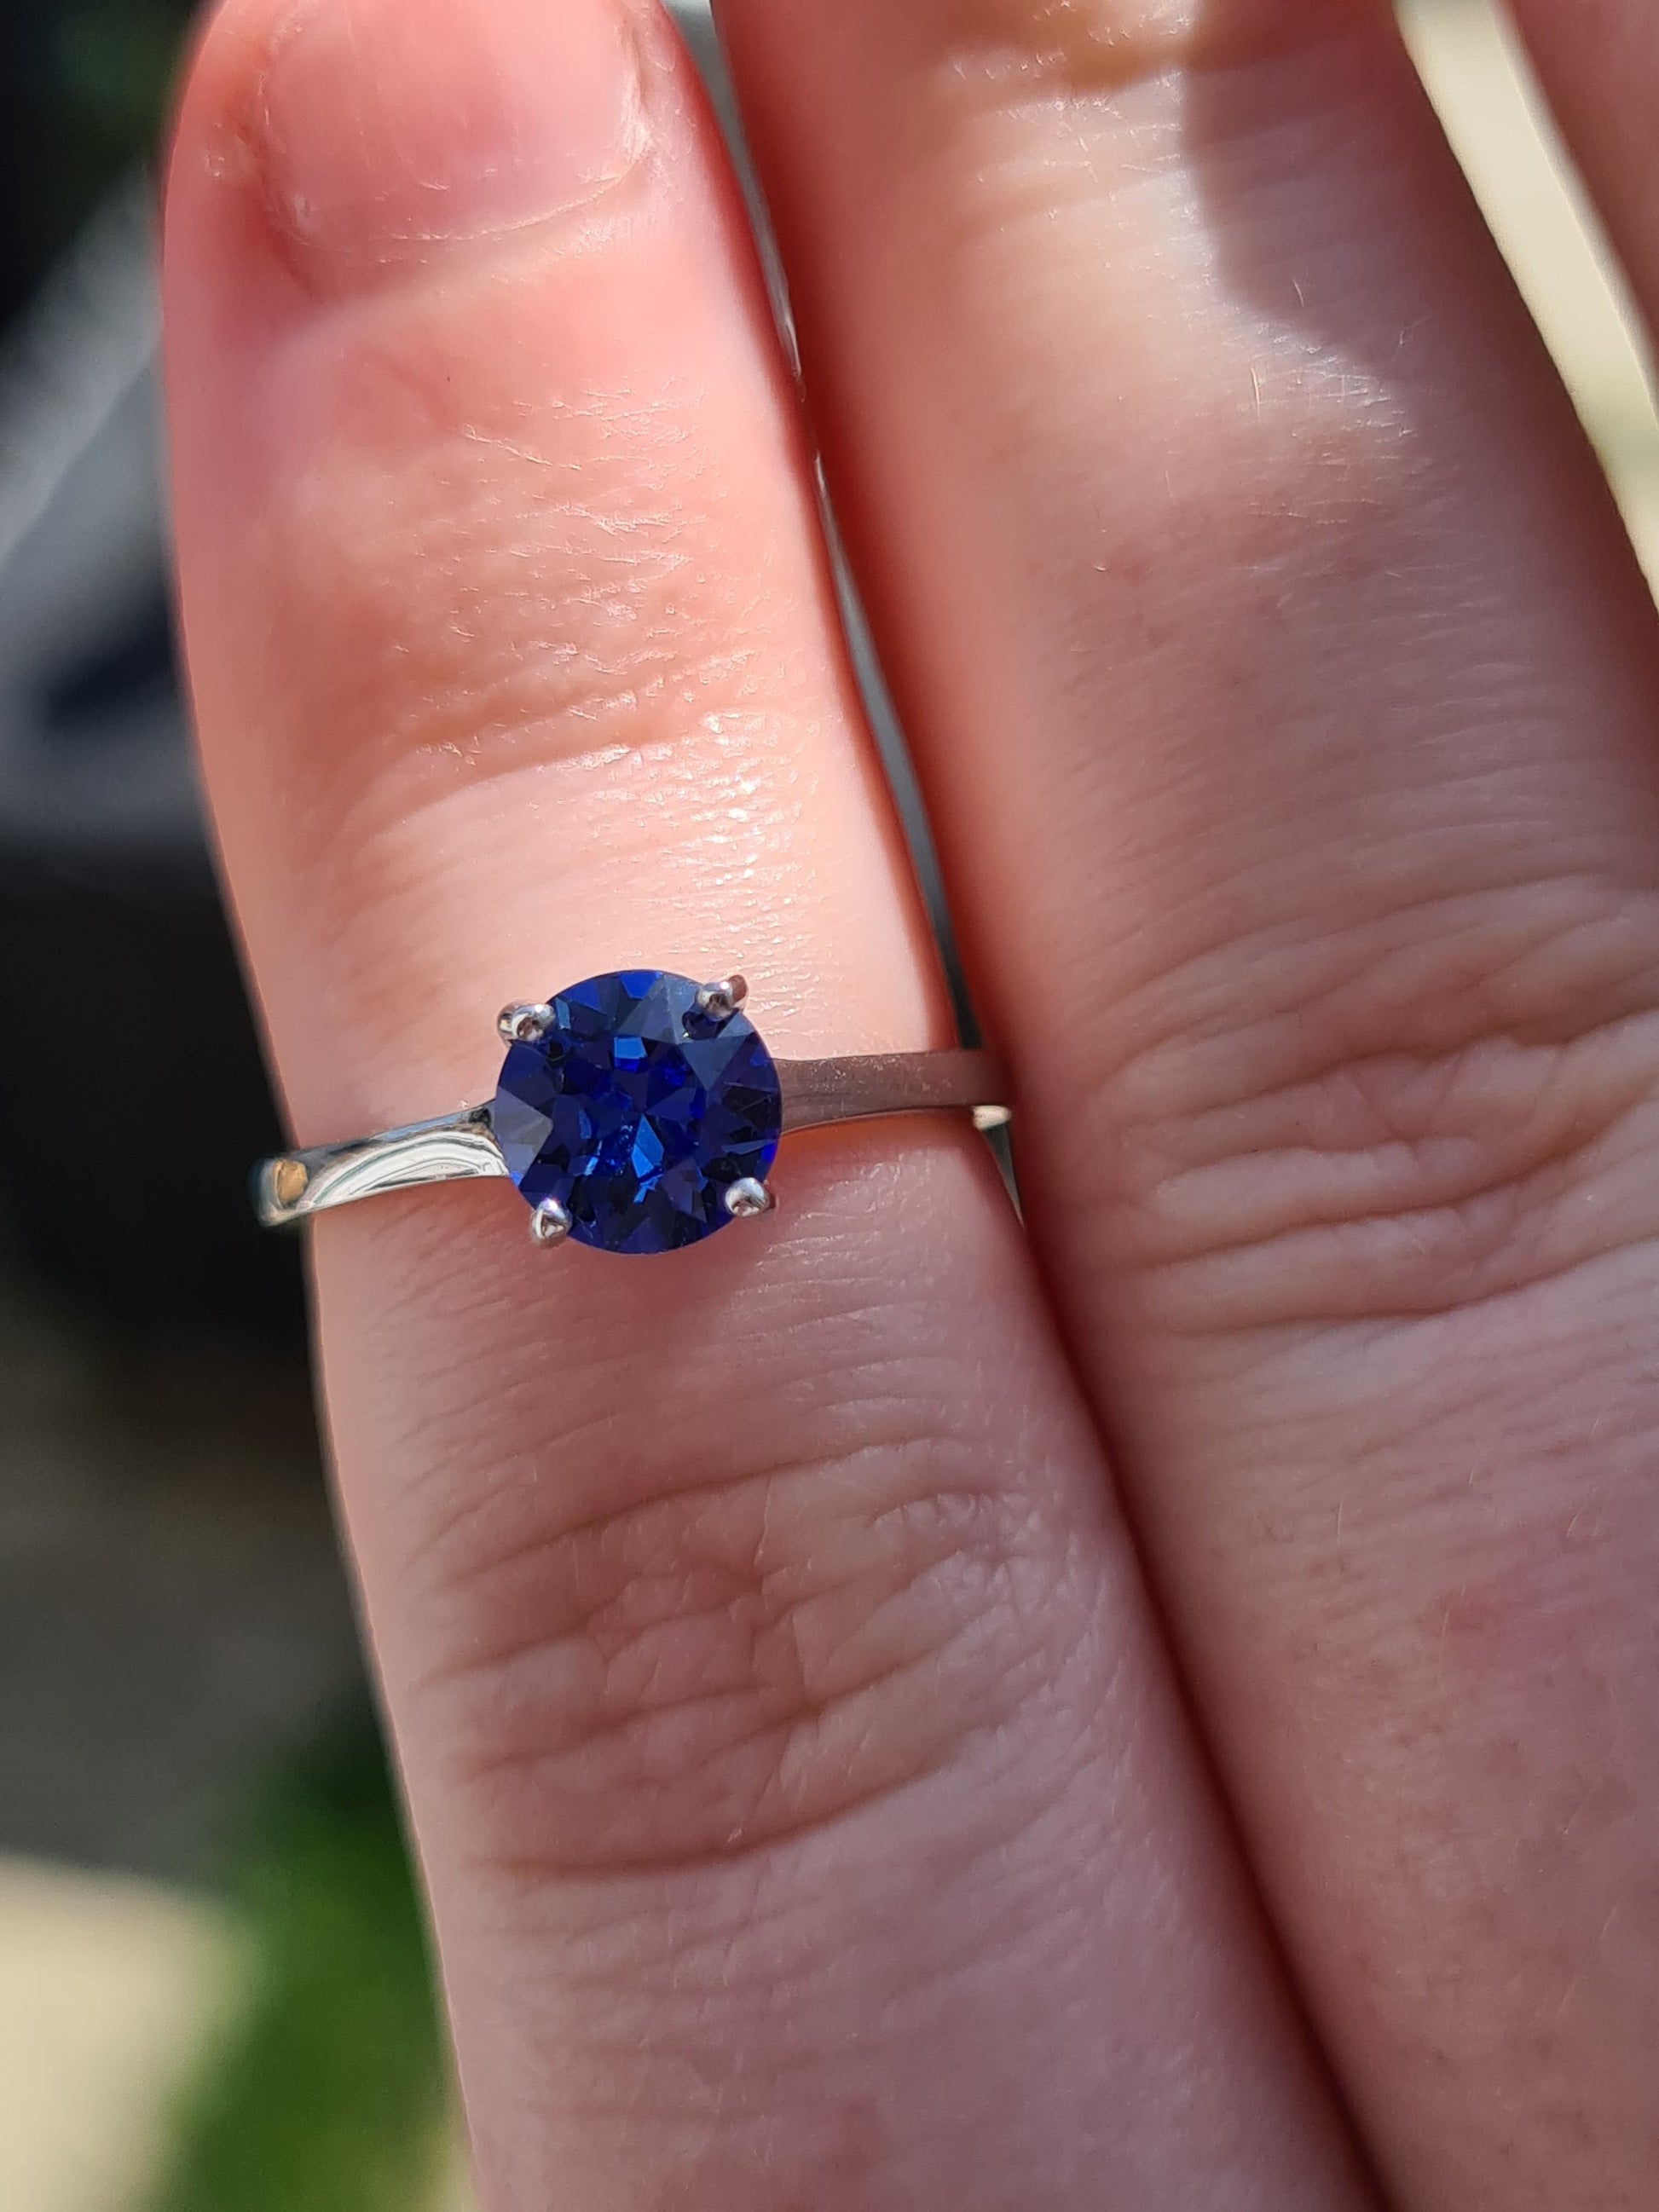 White Gold Sapphire Ring | Blue Sapphire Engagement Rings